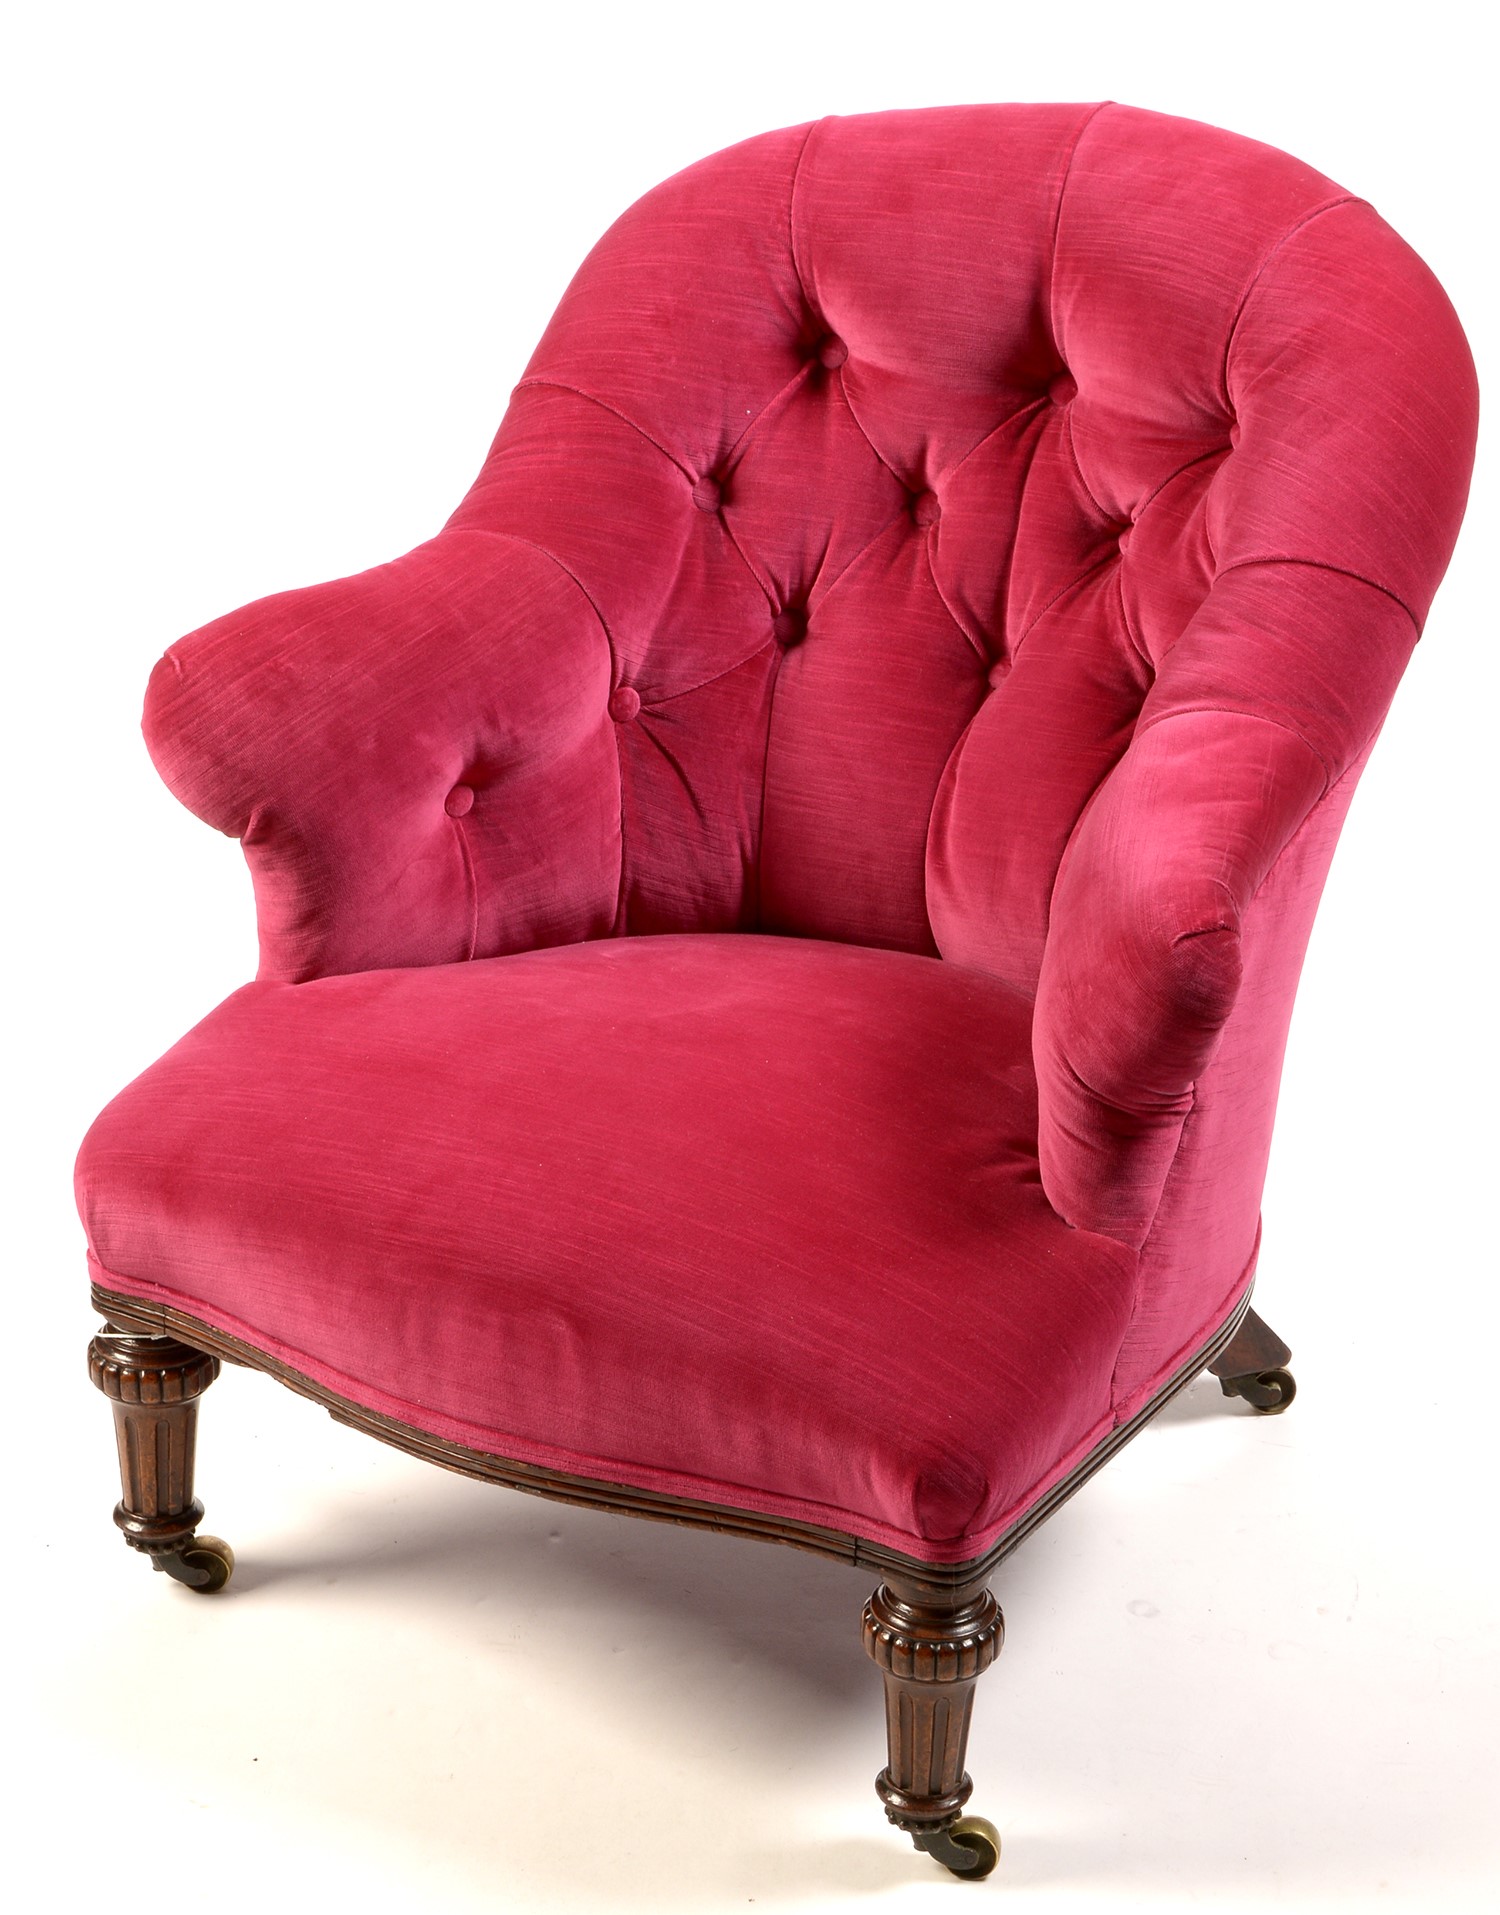 Top 5 reasons to buy furniture at Auction